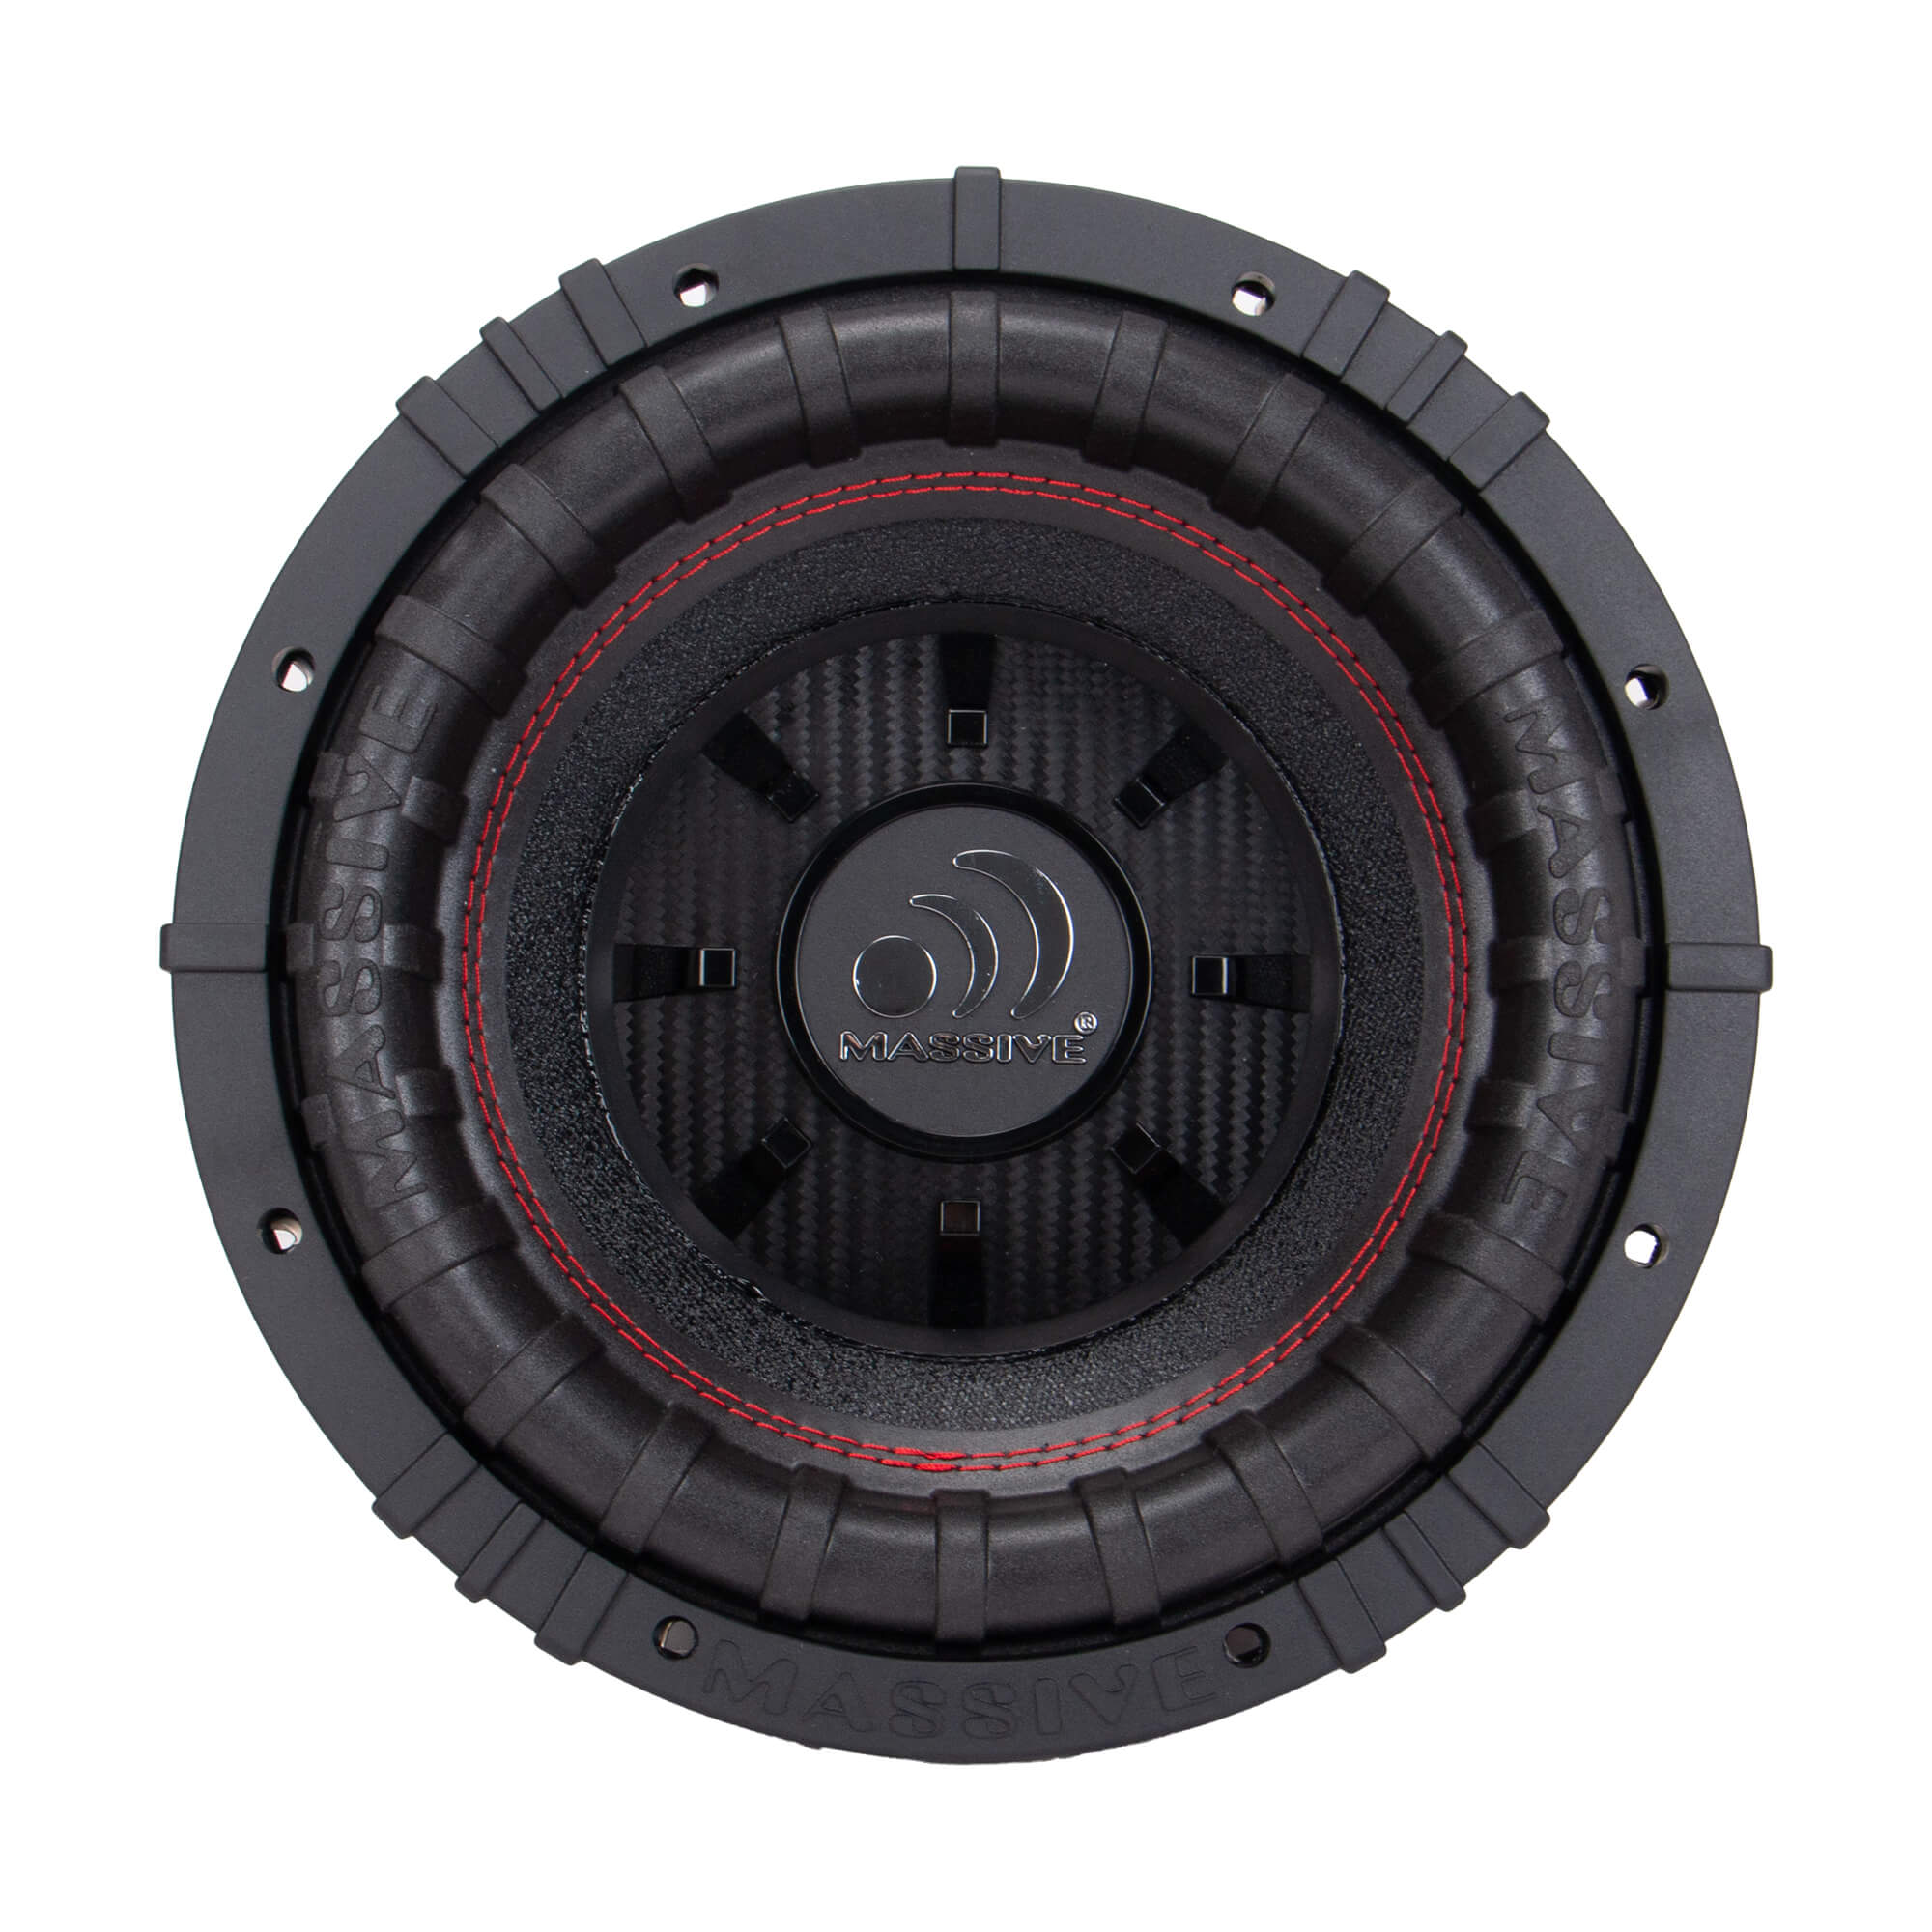 GTR104 - 10" 1000 Watts RMS Dual 4 Ohm Subwoofer